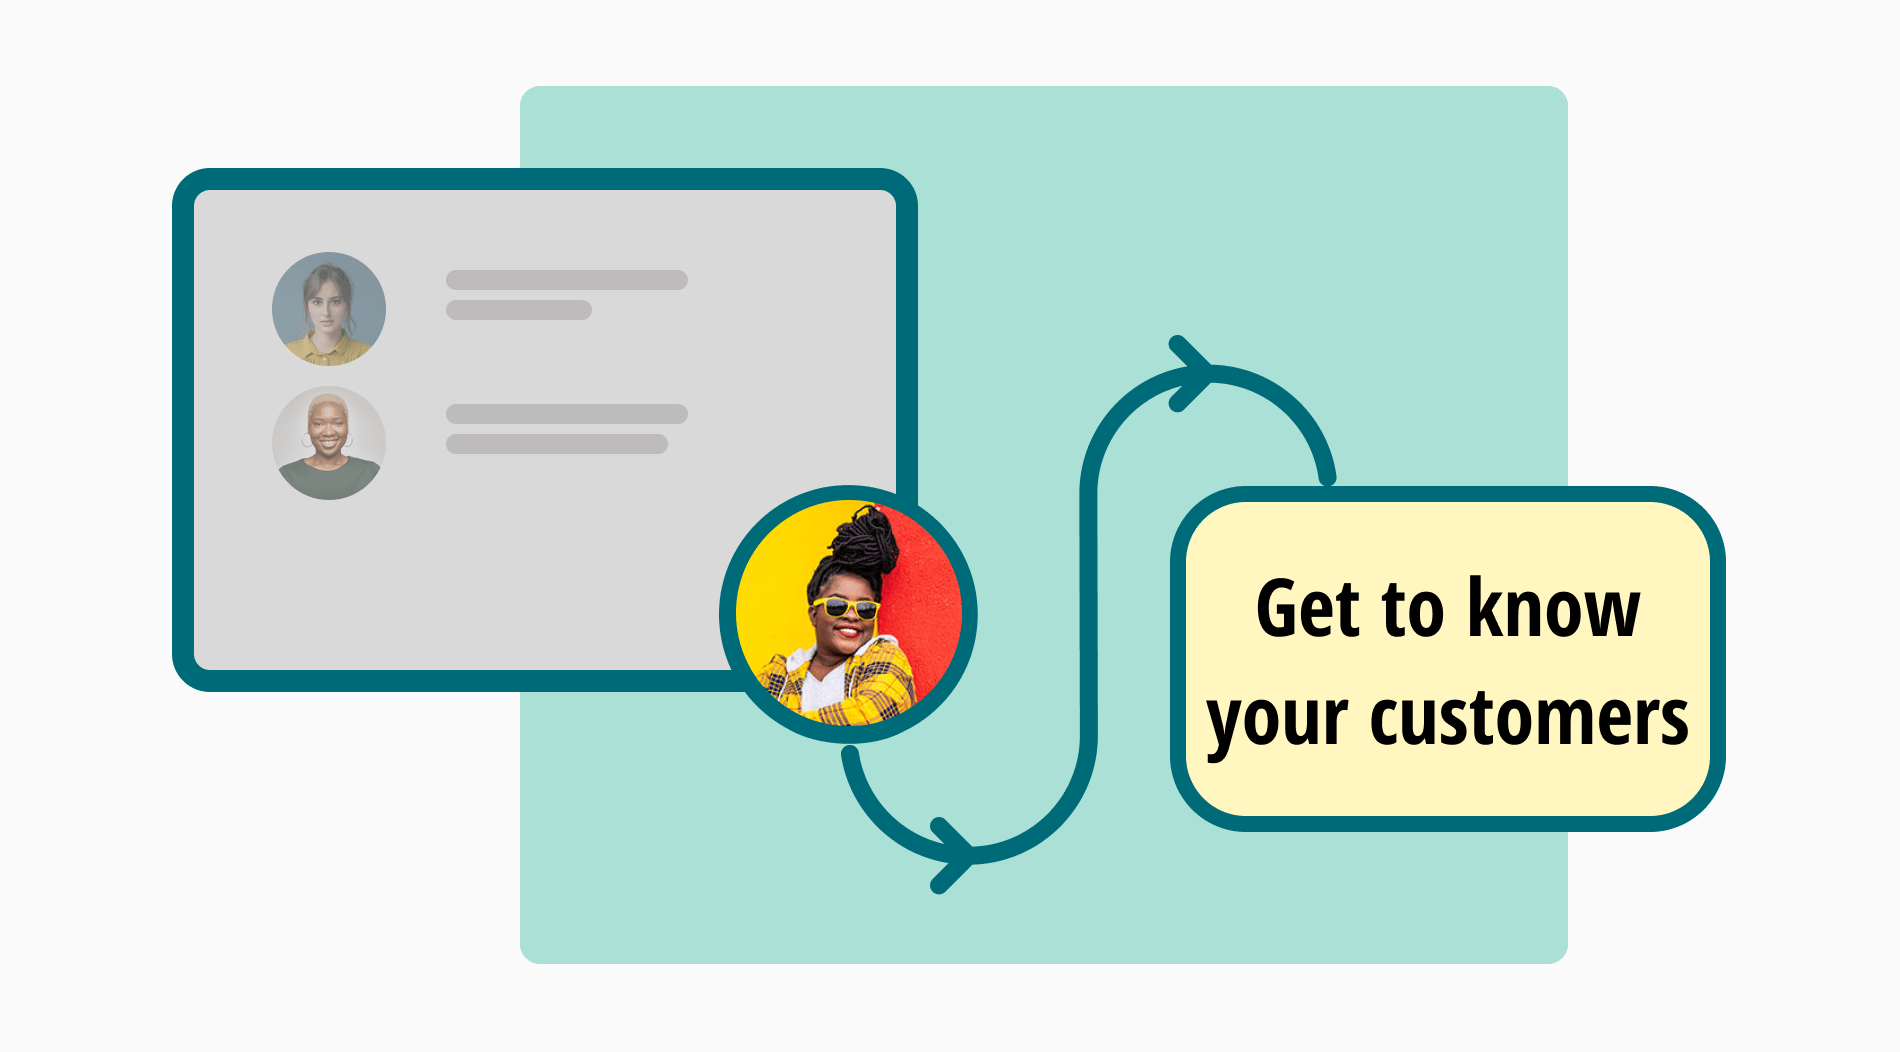 5 Great ways: How to get to know your customers